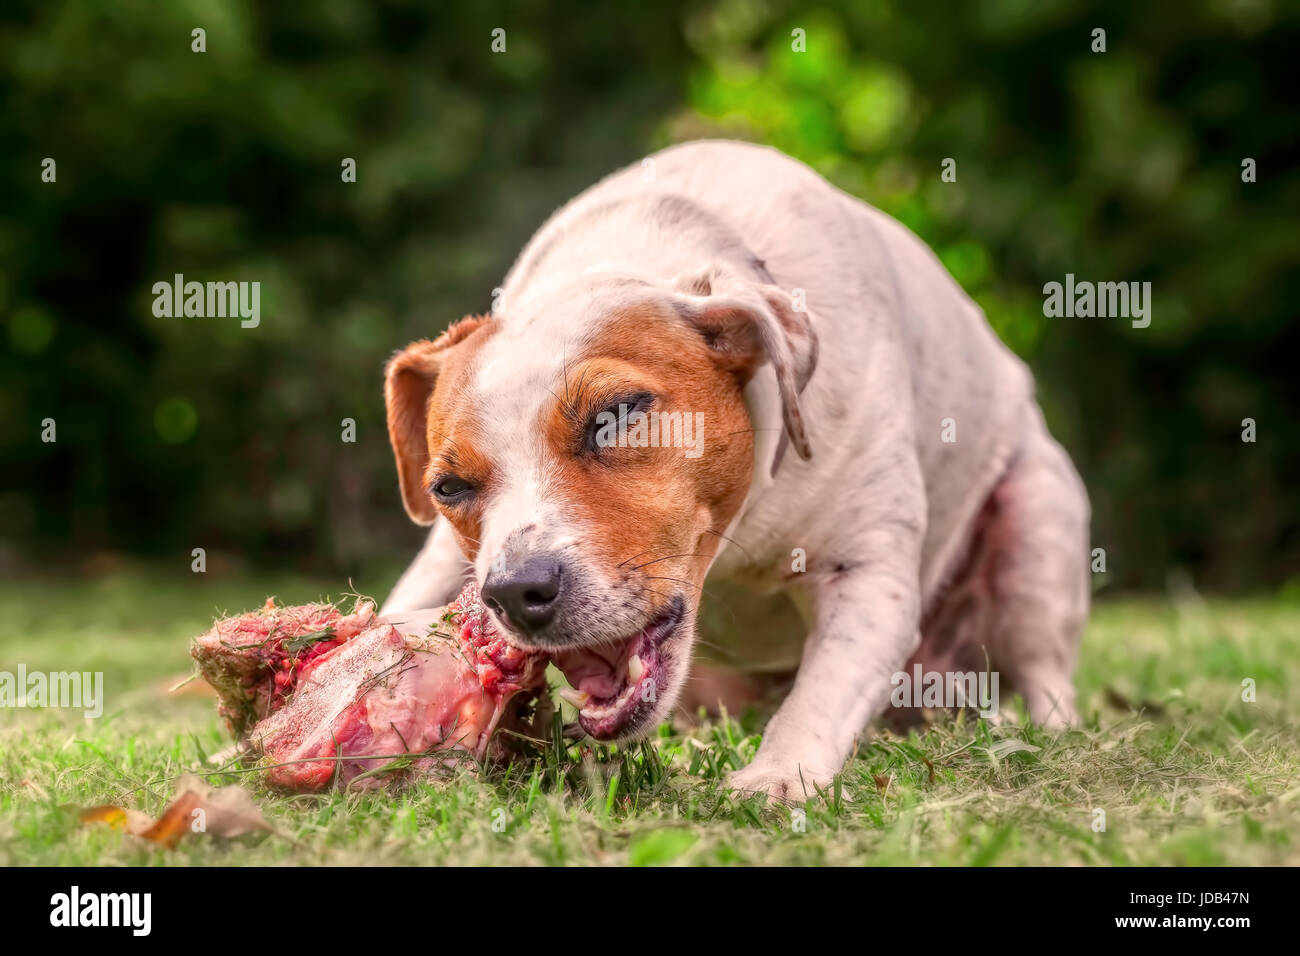 Jack Russell Terrier Female Dog Lying On A Green Field Happily Chewing A Large Raw Bone Full Of Meat Stock Photo